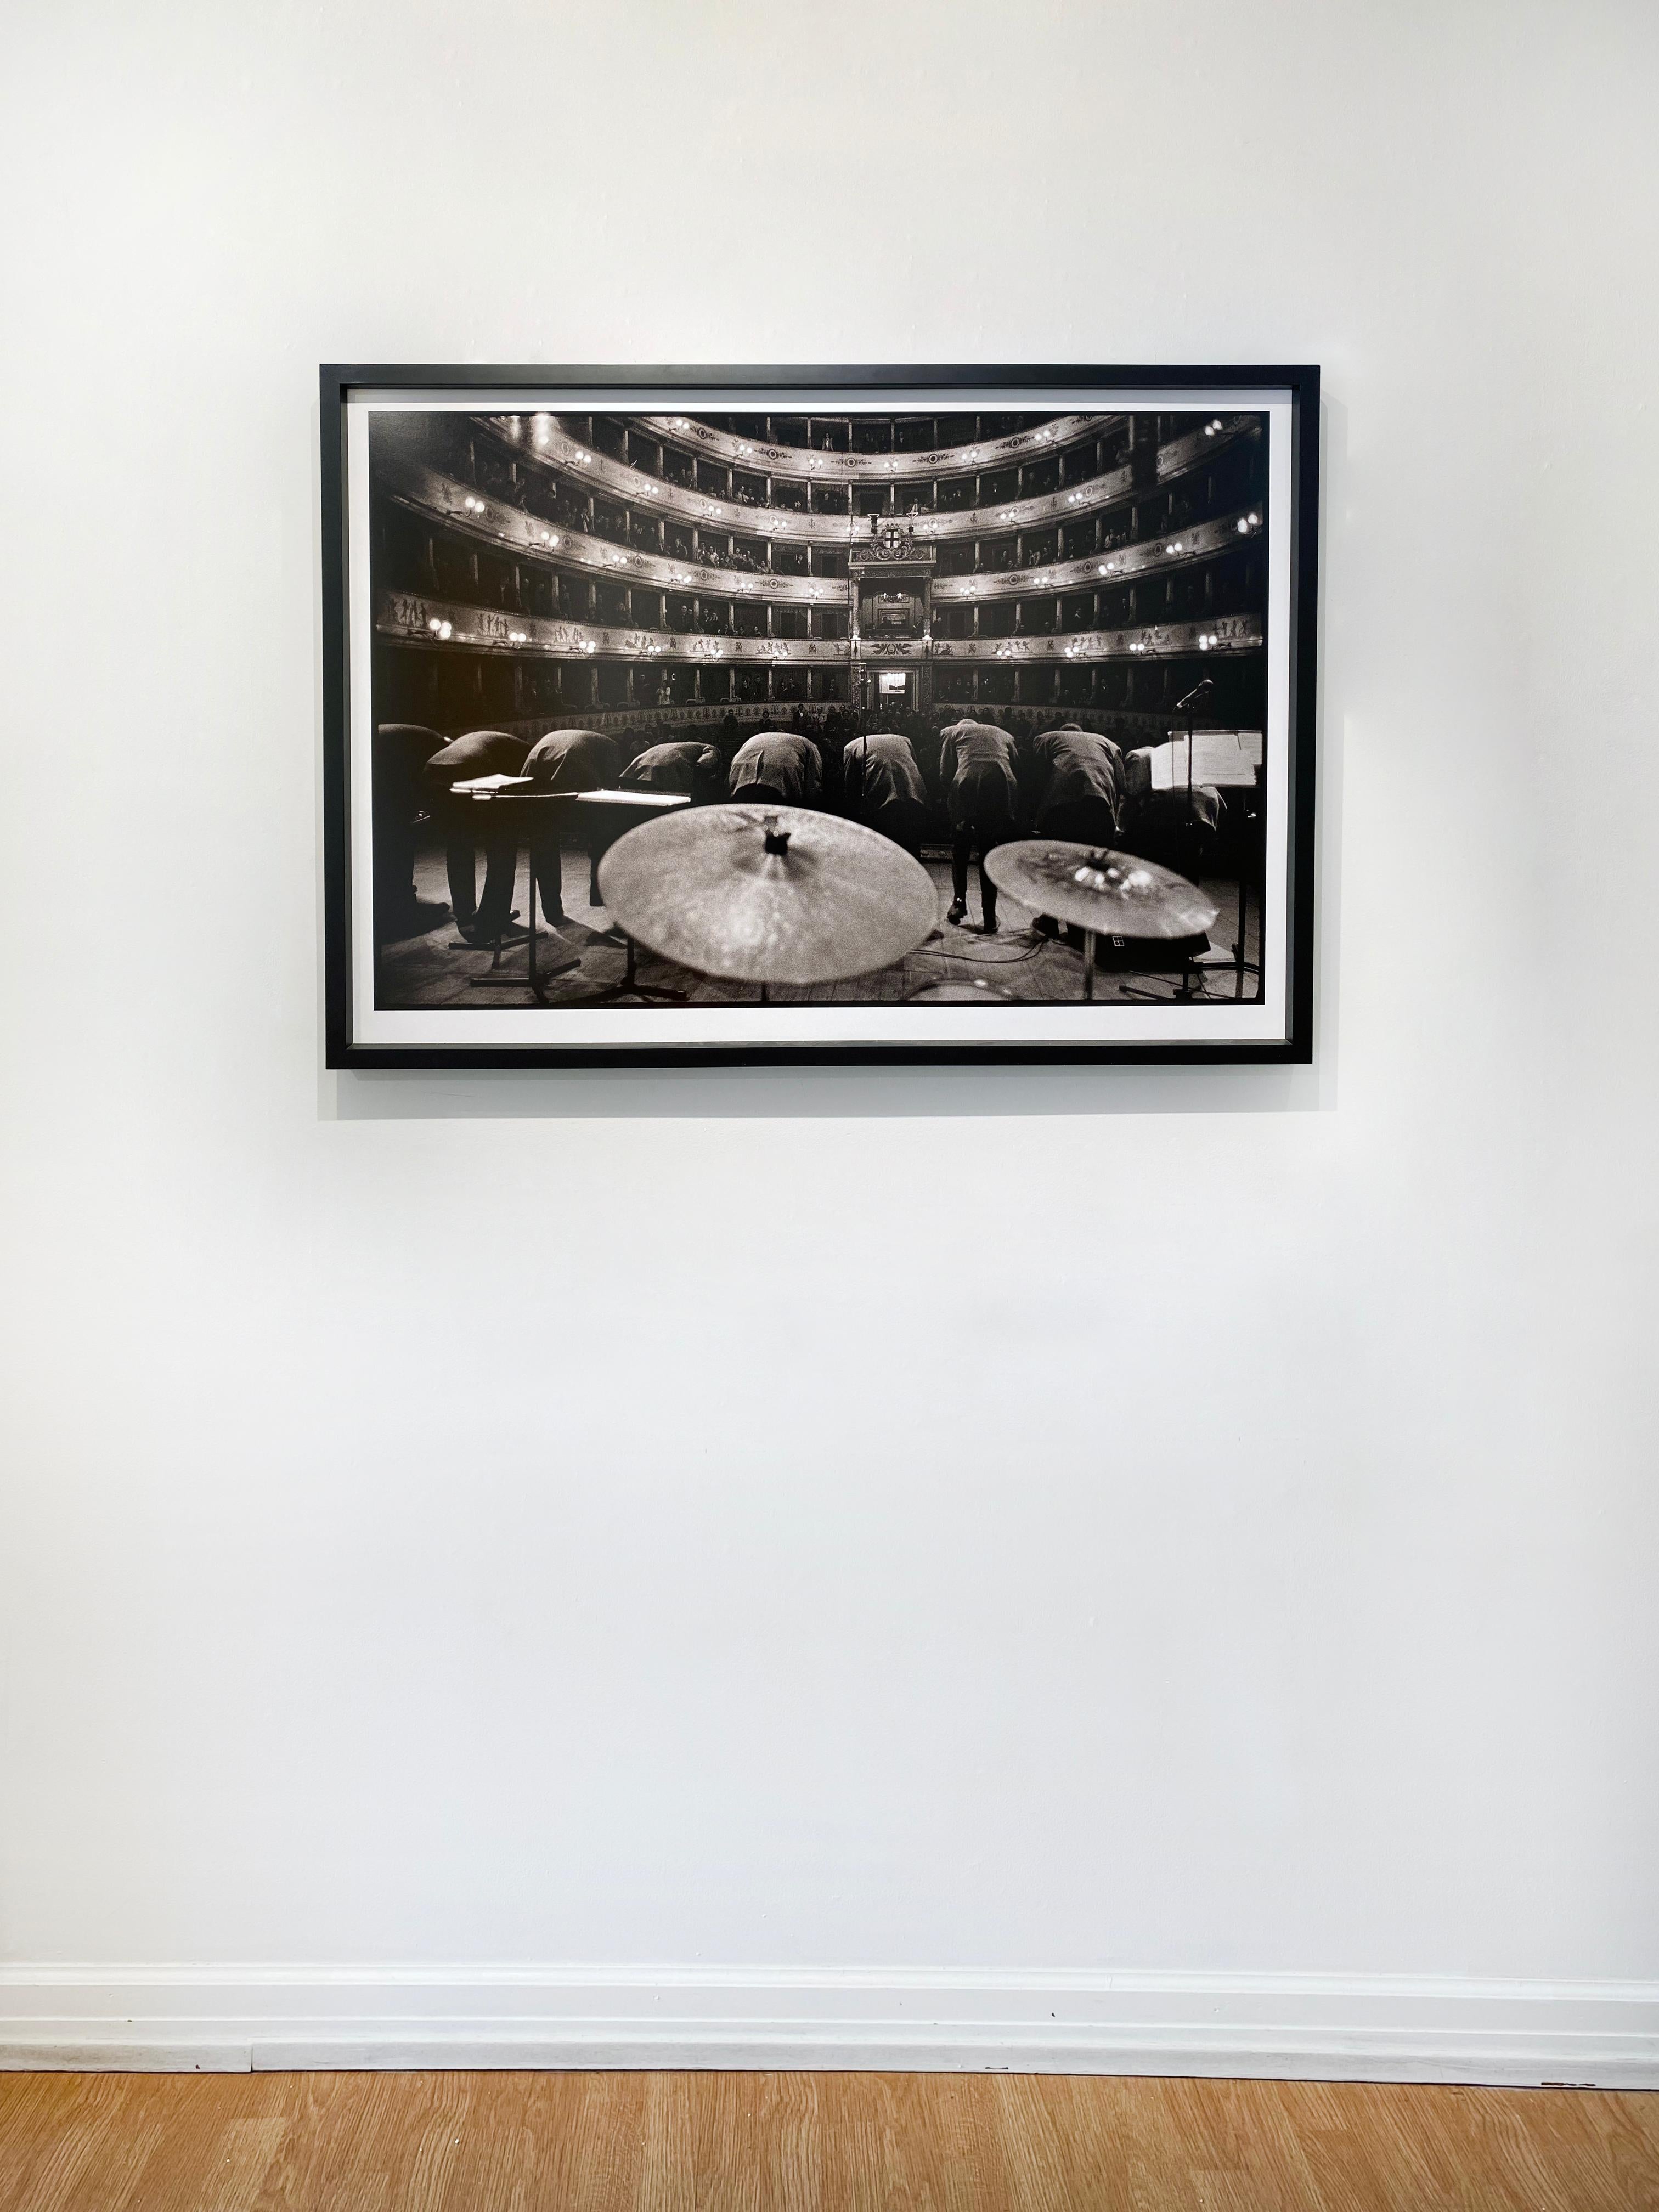 'The Bow' by American photographer Frank Stewart, 1997. Pigment print, 30 x 40 inches. This photograph features the group Jazz at Lincoln Center bowing in unison after a concert in Modena, Italy. Wynton Marsalis is one of the central figures in the